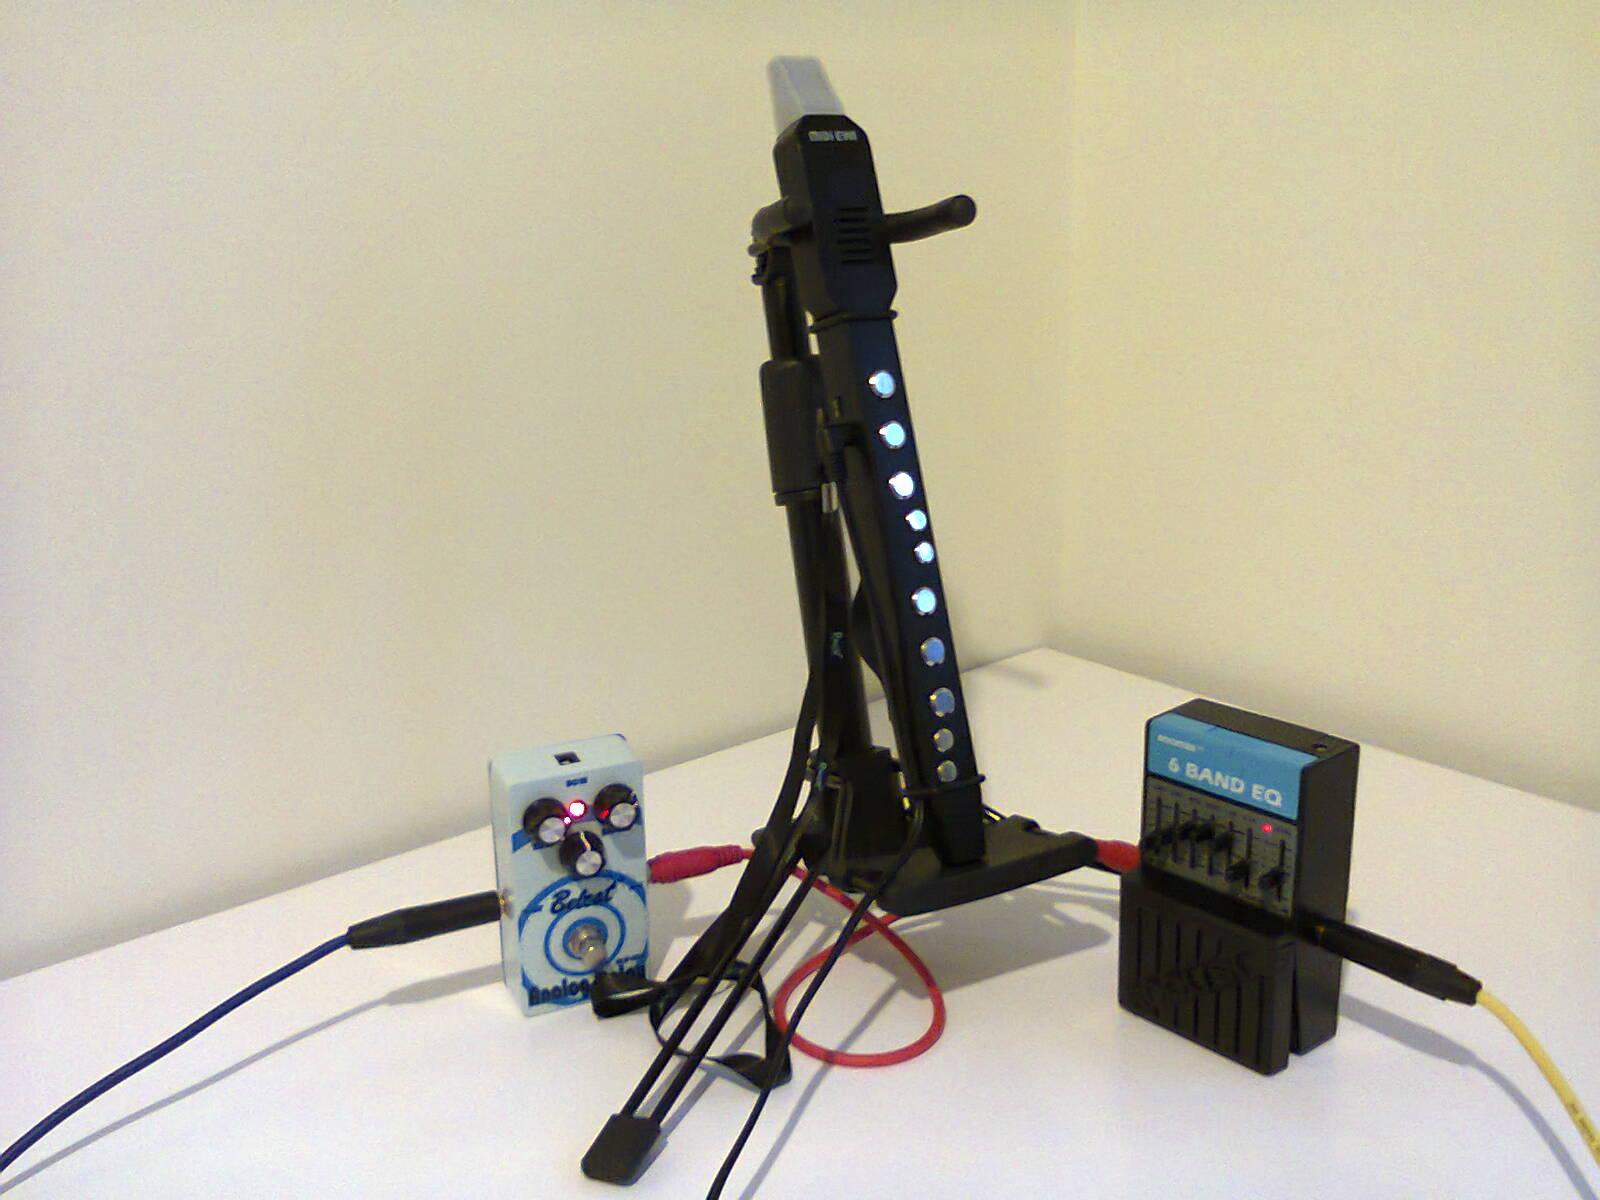 Electronic Wind Instrument (EWI) Cheap & Easy Non-destructive Mods & Cleaning